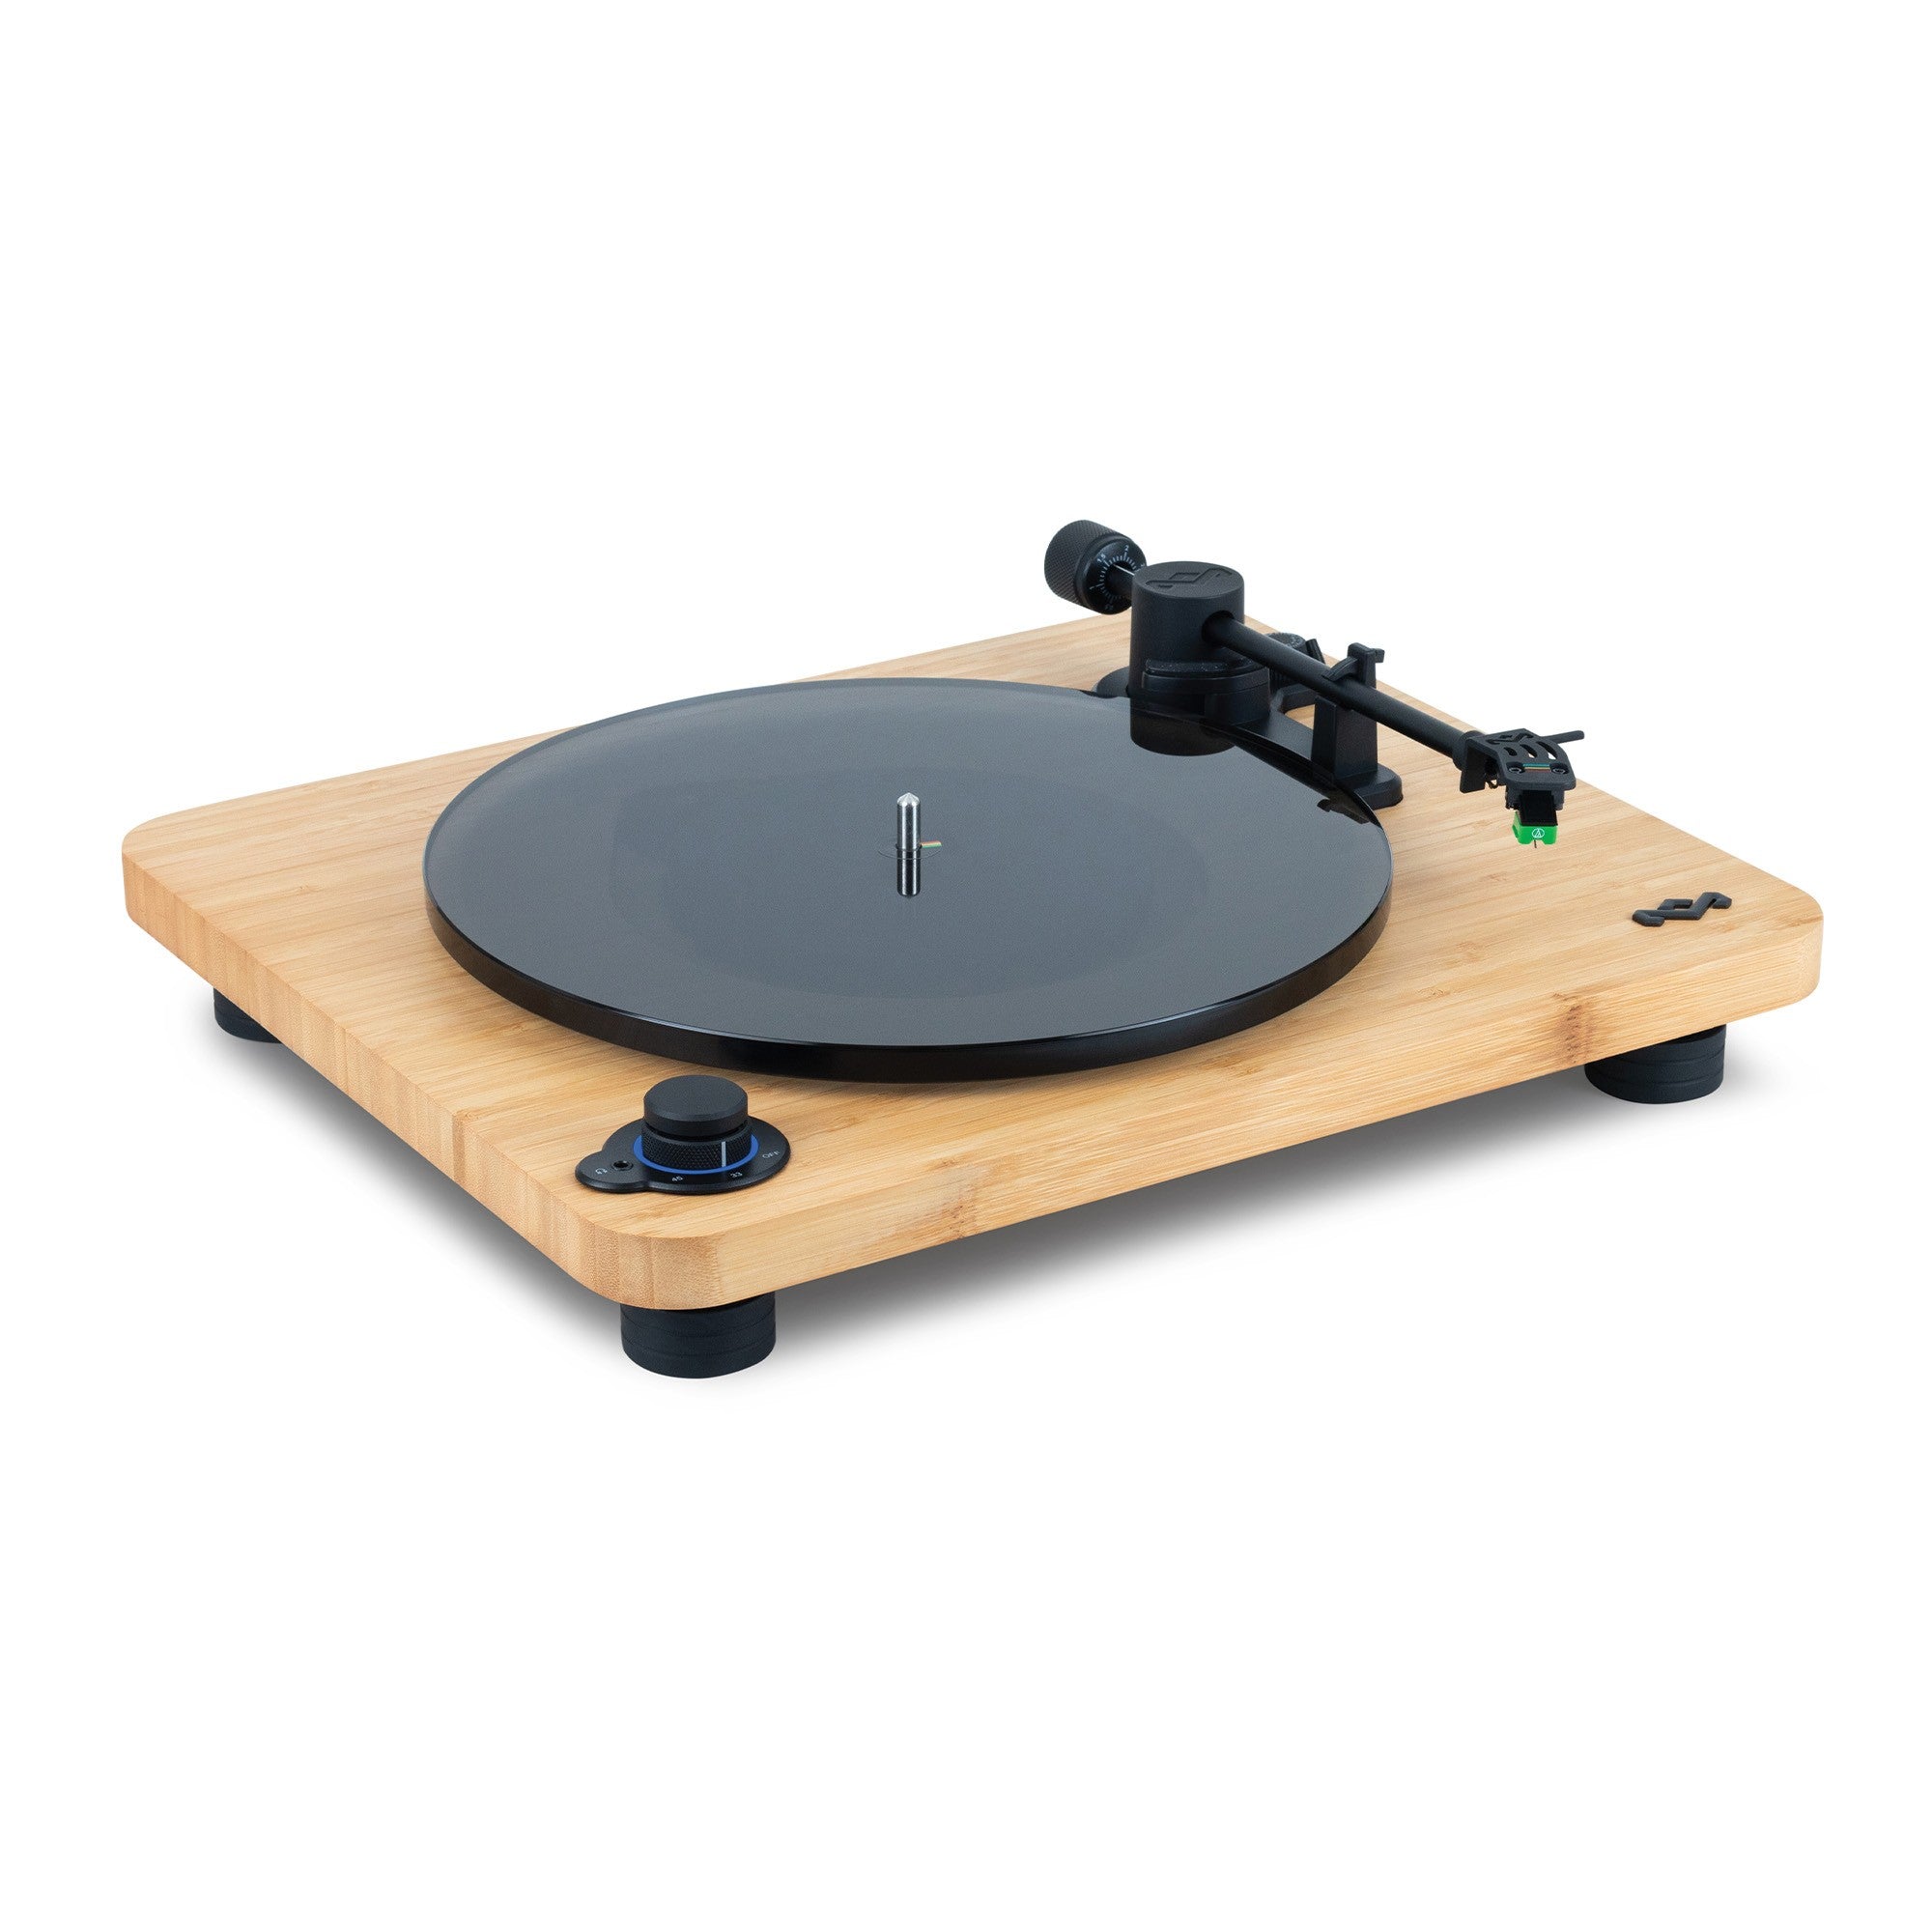 House of Marley Stir It Up Lux Turntable - Light Wood - 15-11956